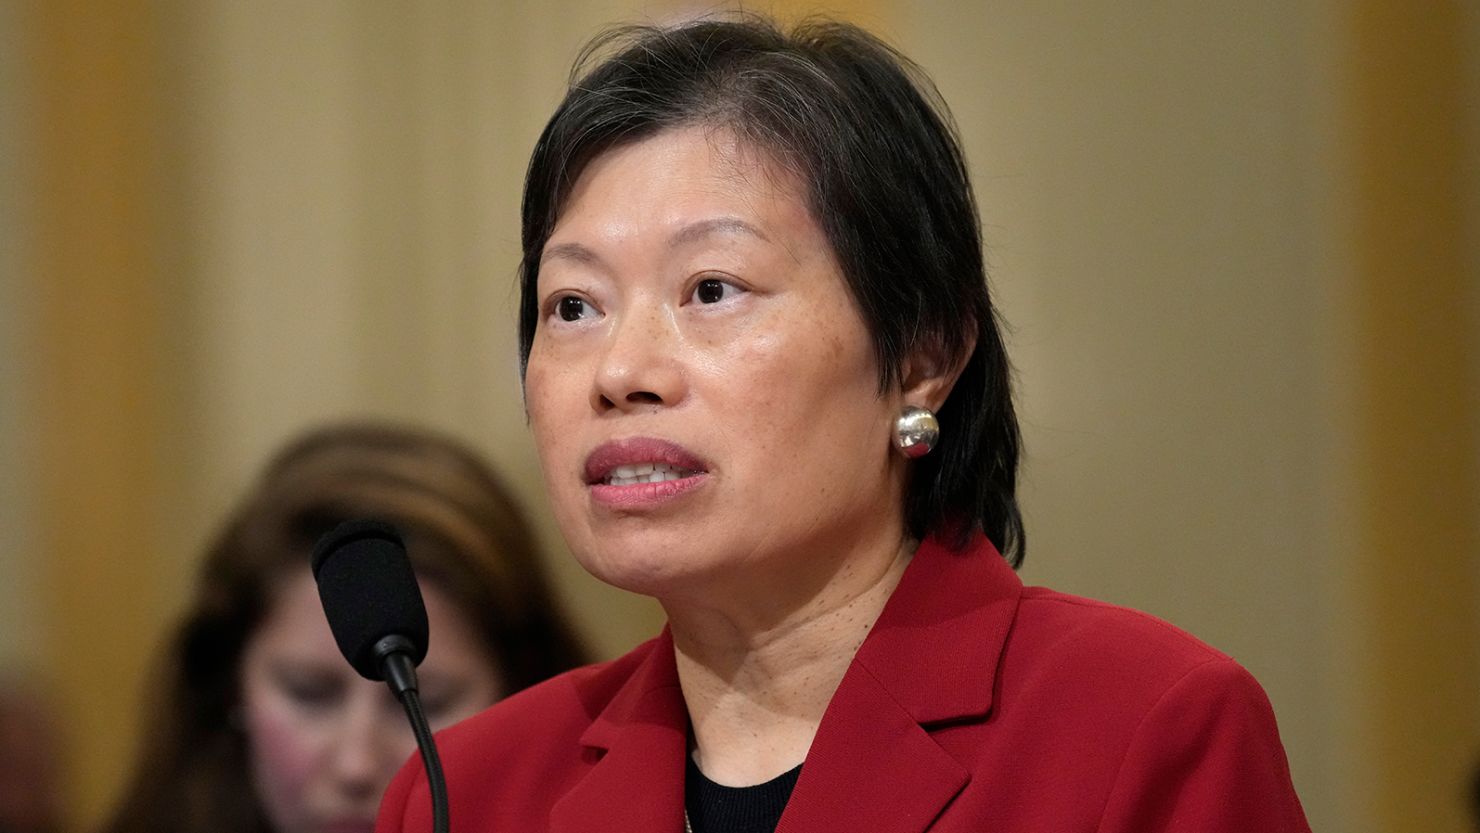 Human rights advocate Tong Yi, testifies during a hearing of a special House committee dedicated to countering China, on Capitol Hill, Tuesday, Feb. 28, 2023, in Washington.